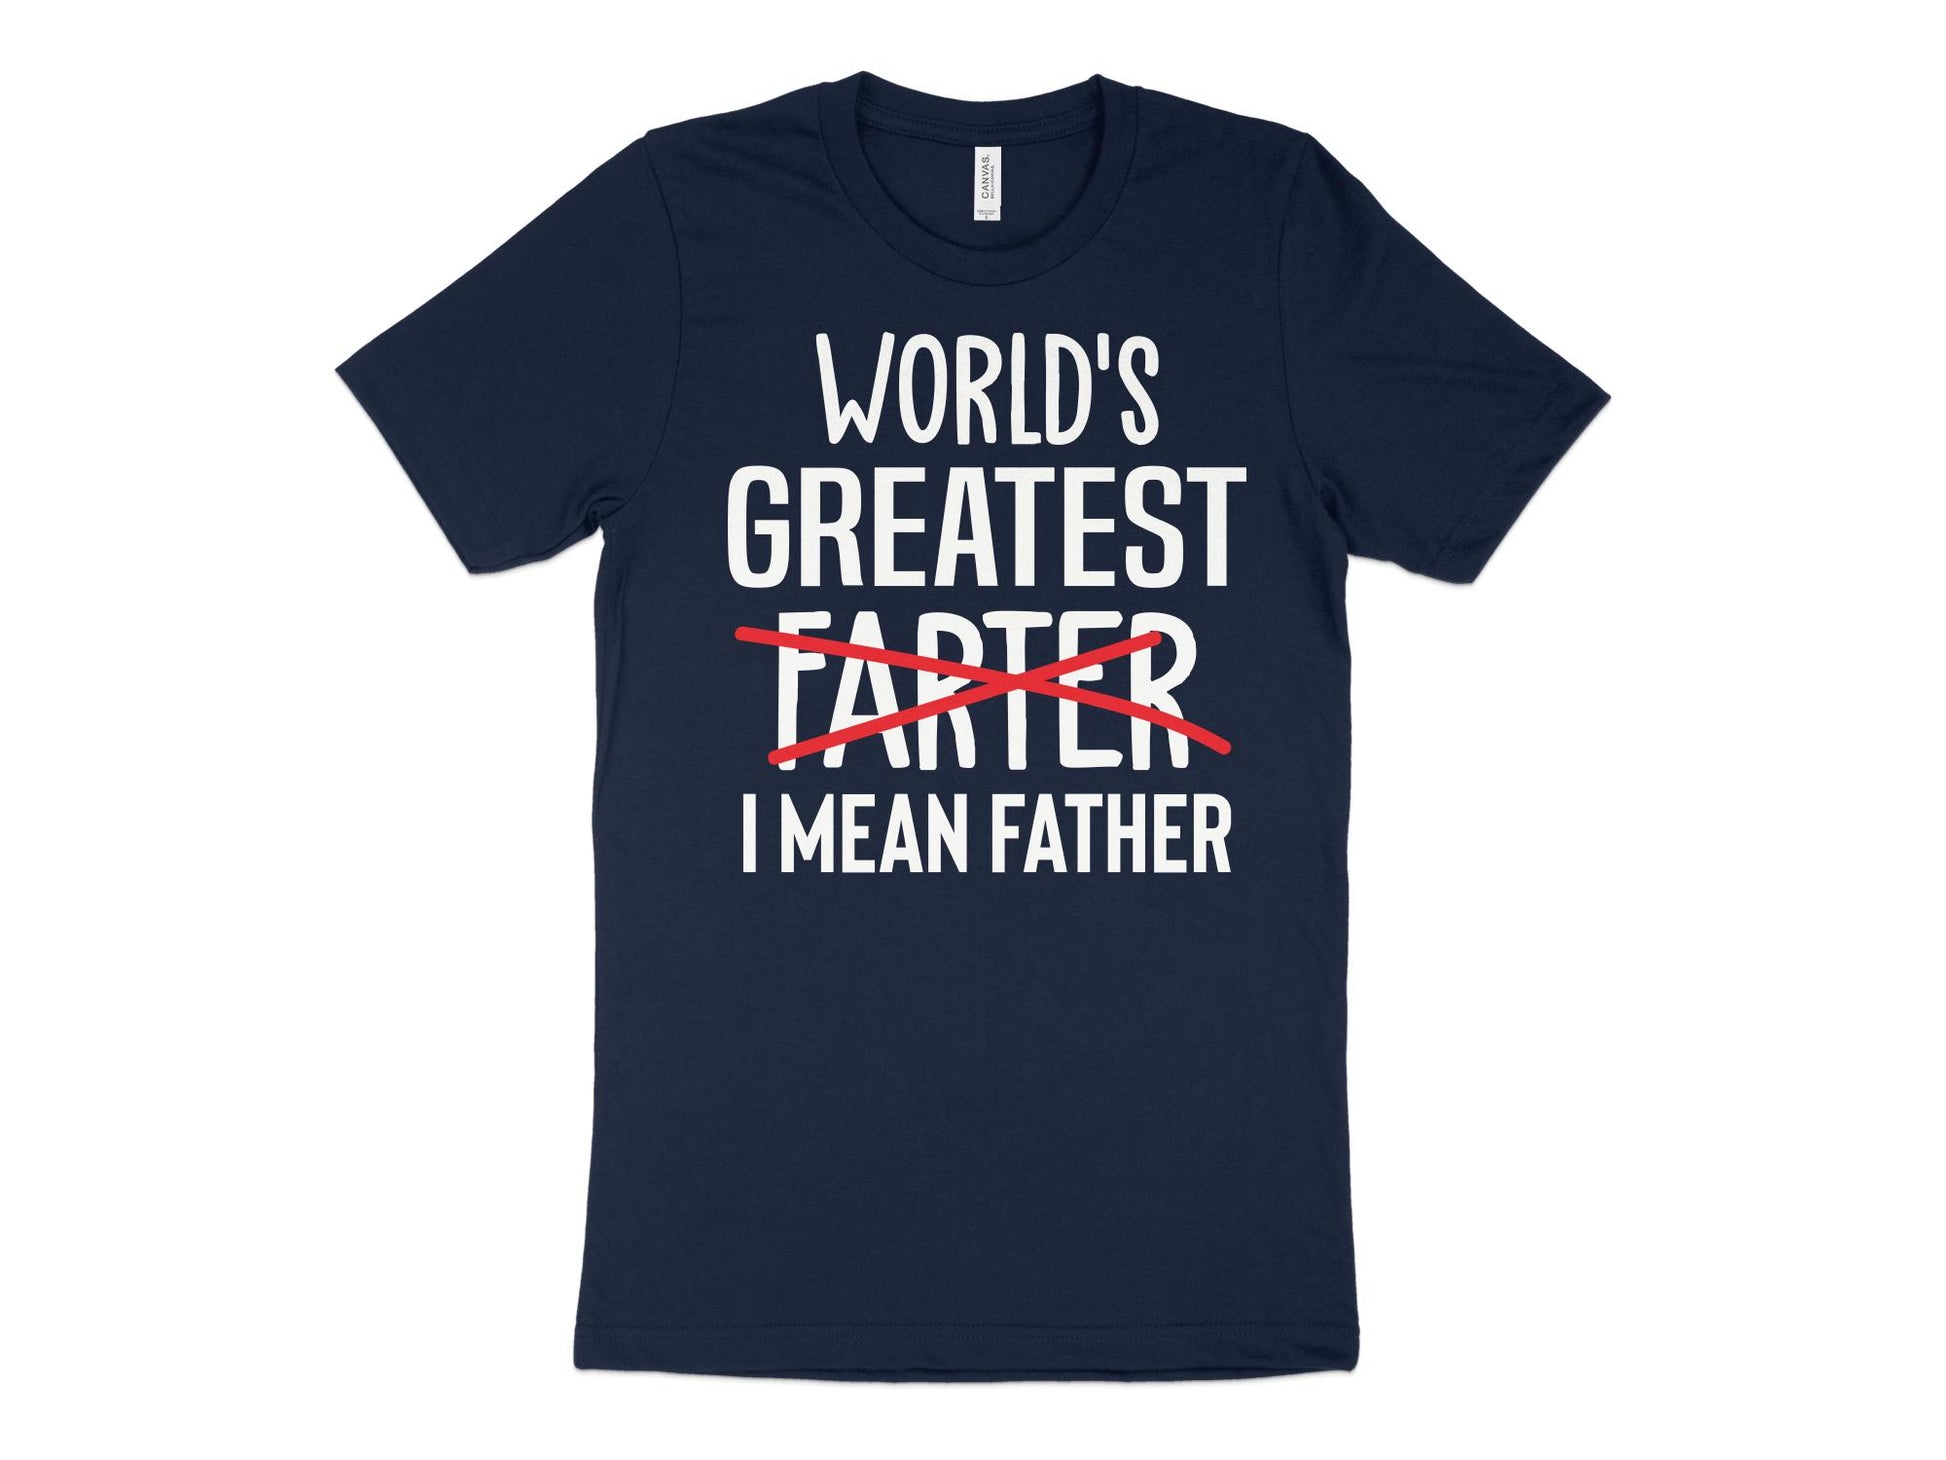 World's Greatest Farter I Mean Father Shirt, navy blue